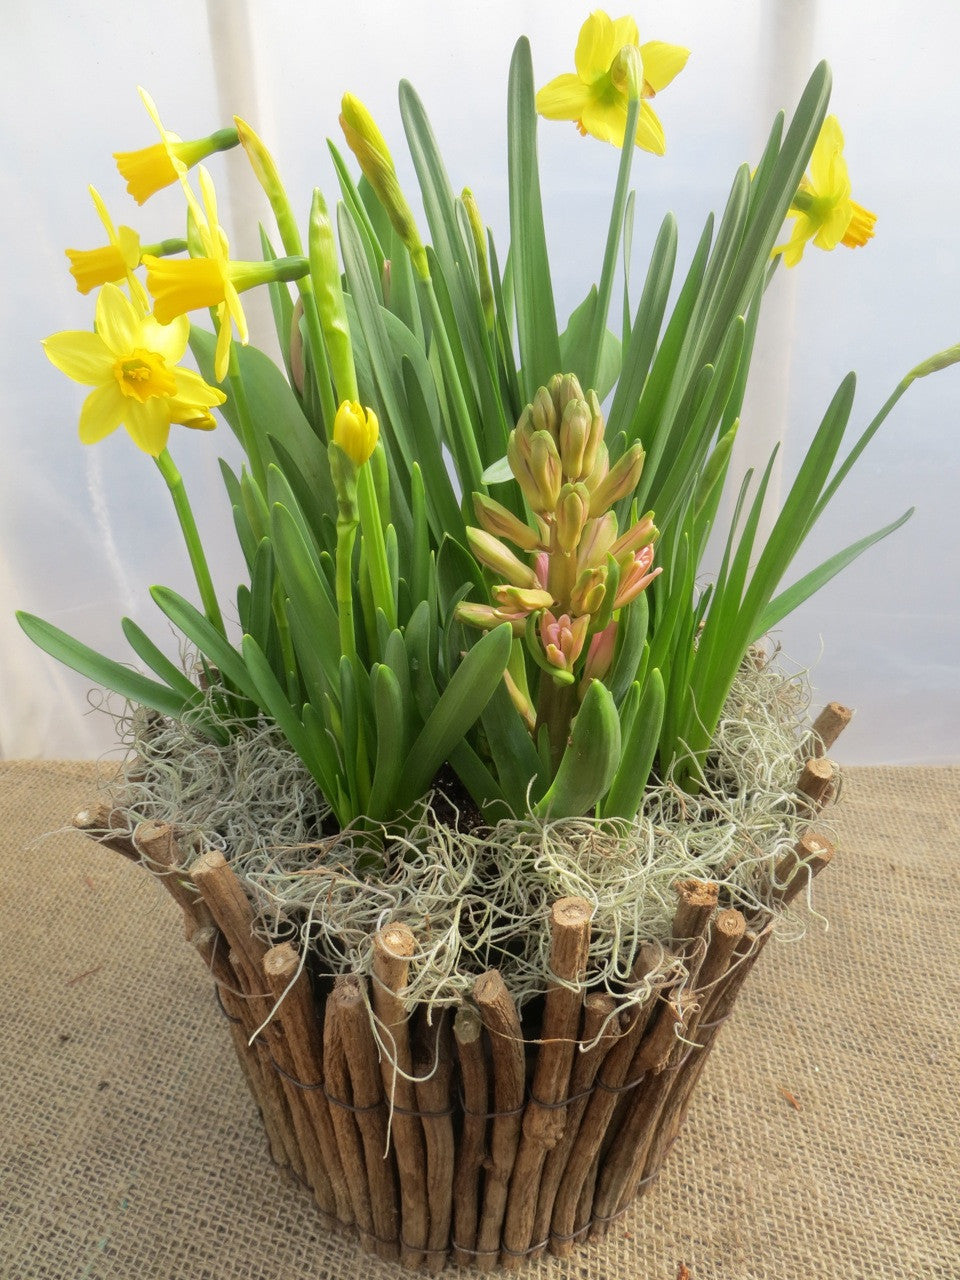 Narcissus - Daffodiles in a twig container | Michler's Florist